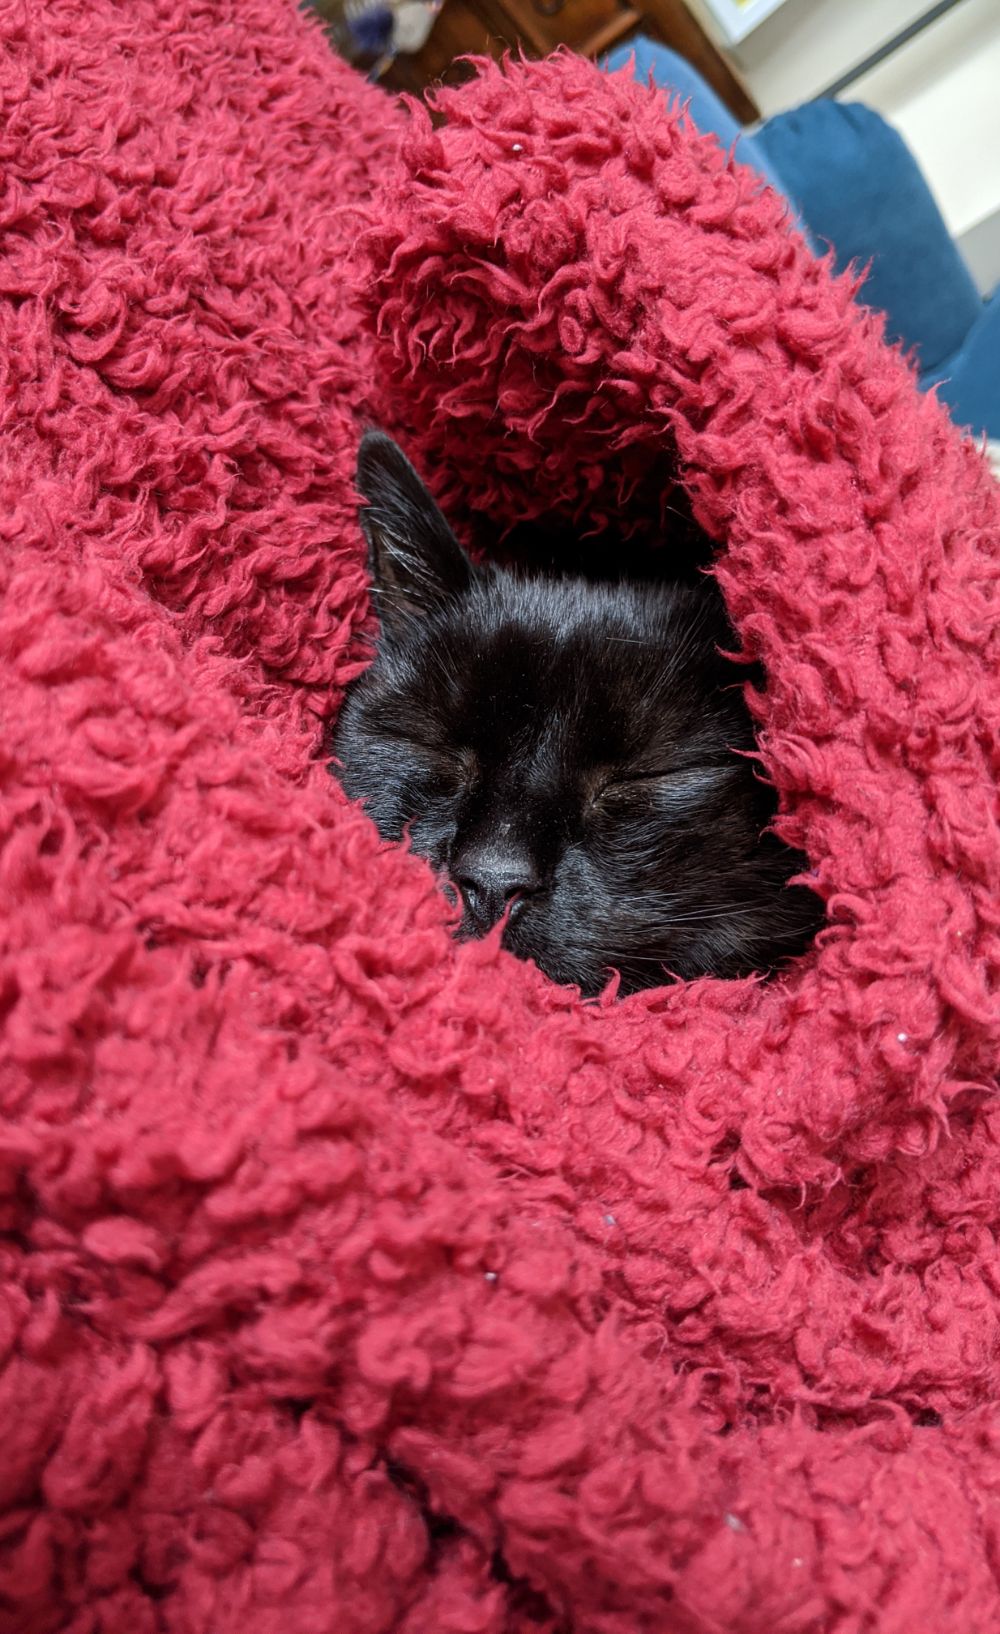 Black cat head surrounded by a sea of red blanket